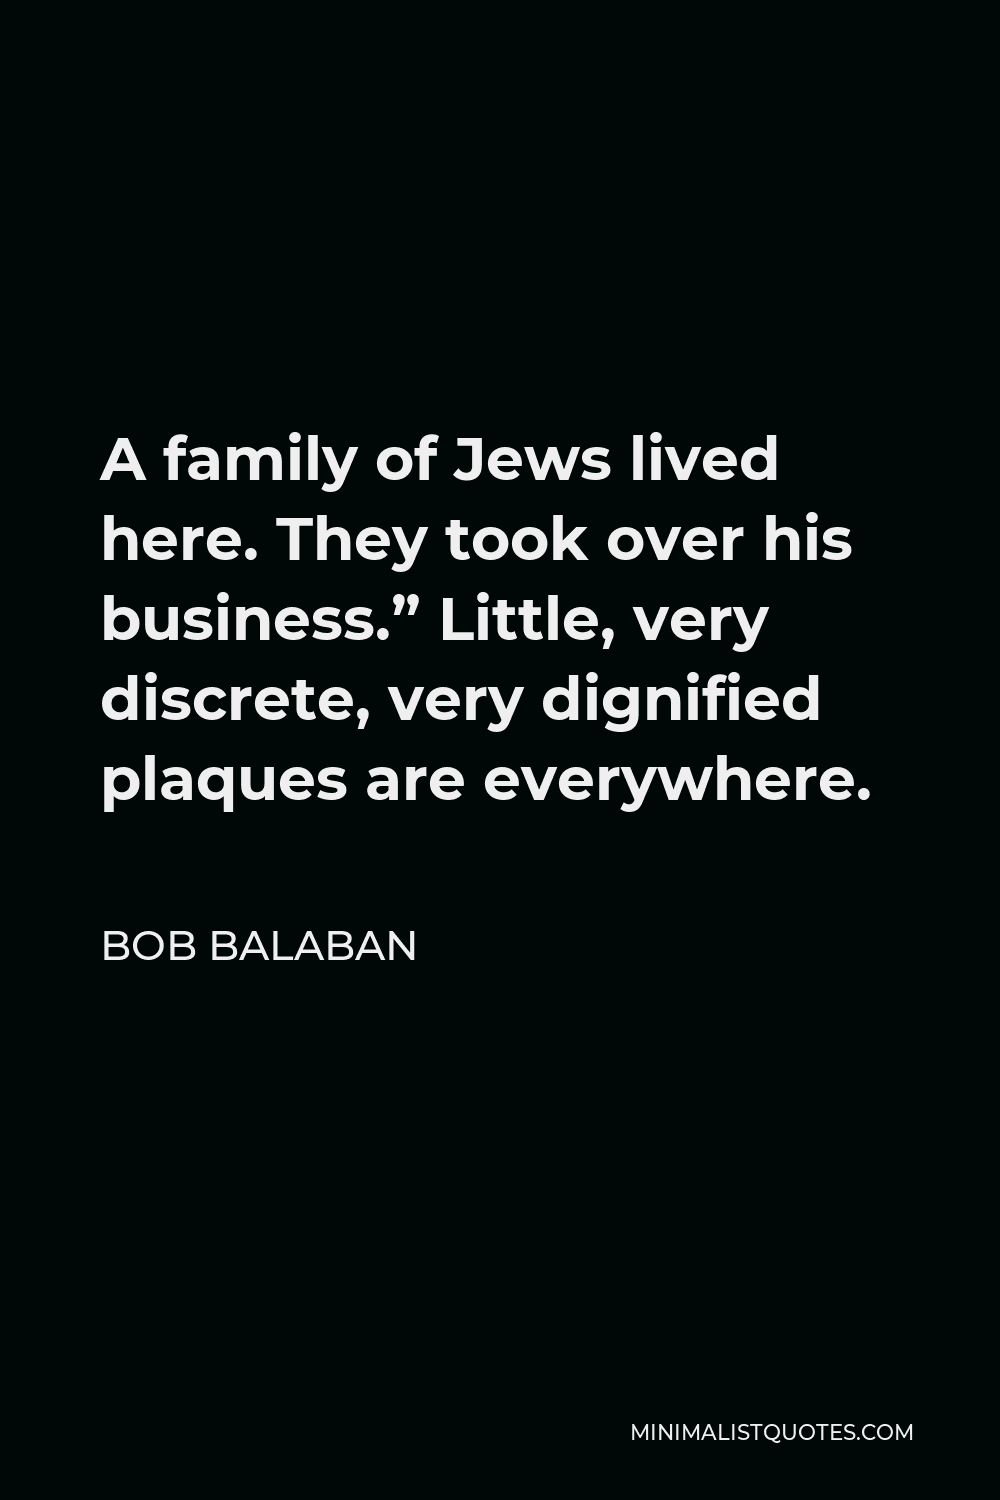 Bob Balaban Quote - A family of Jews lived here. They took over his business.” Little, very discrete, very dignified plaques are everywhere.